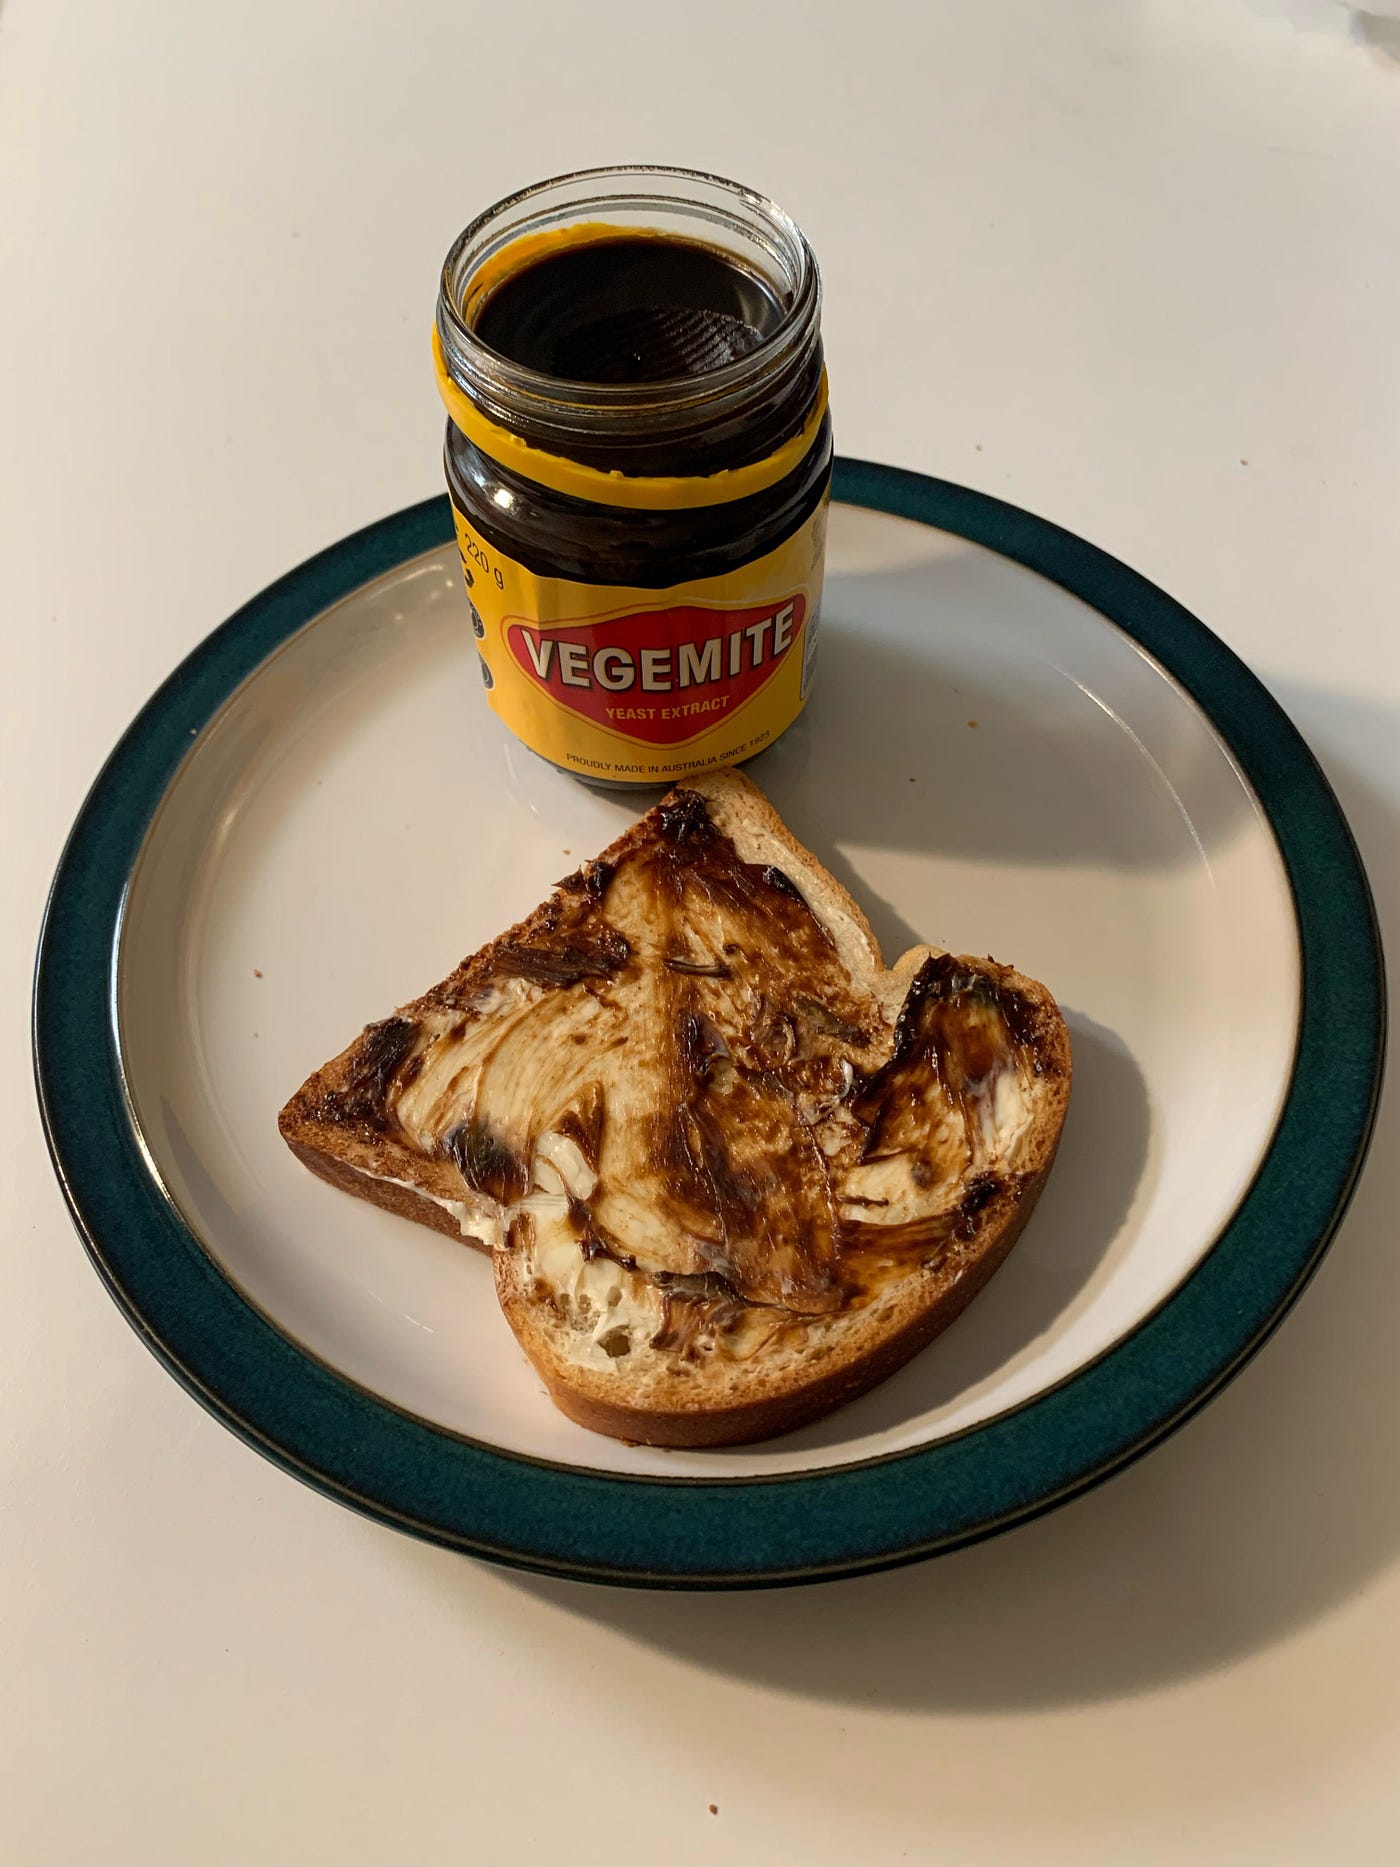 39 years after I heard it in the song, I've finally had a Vegemite